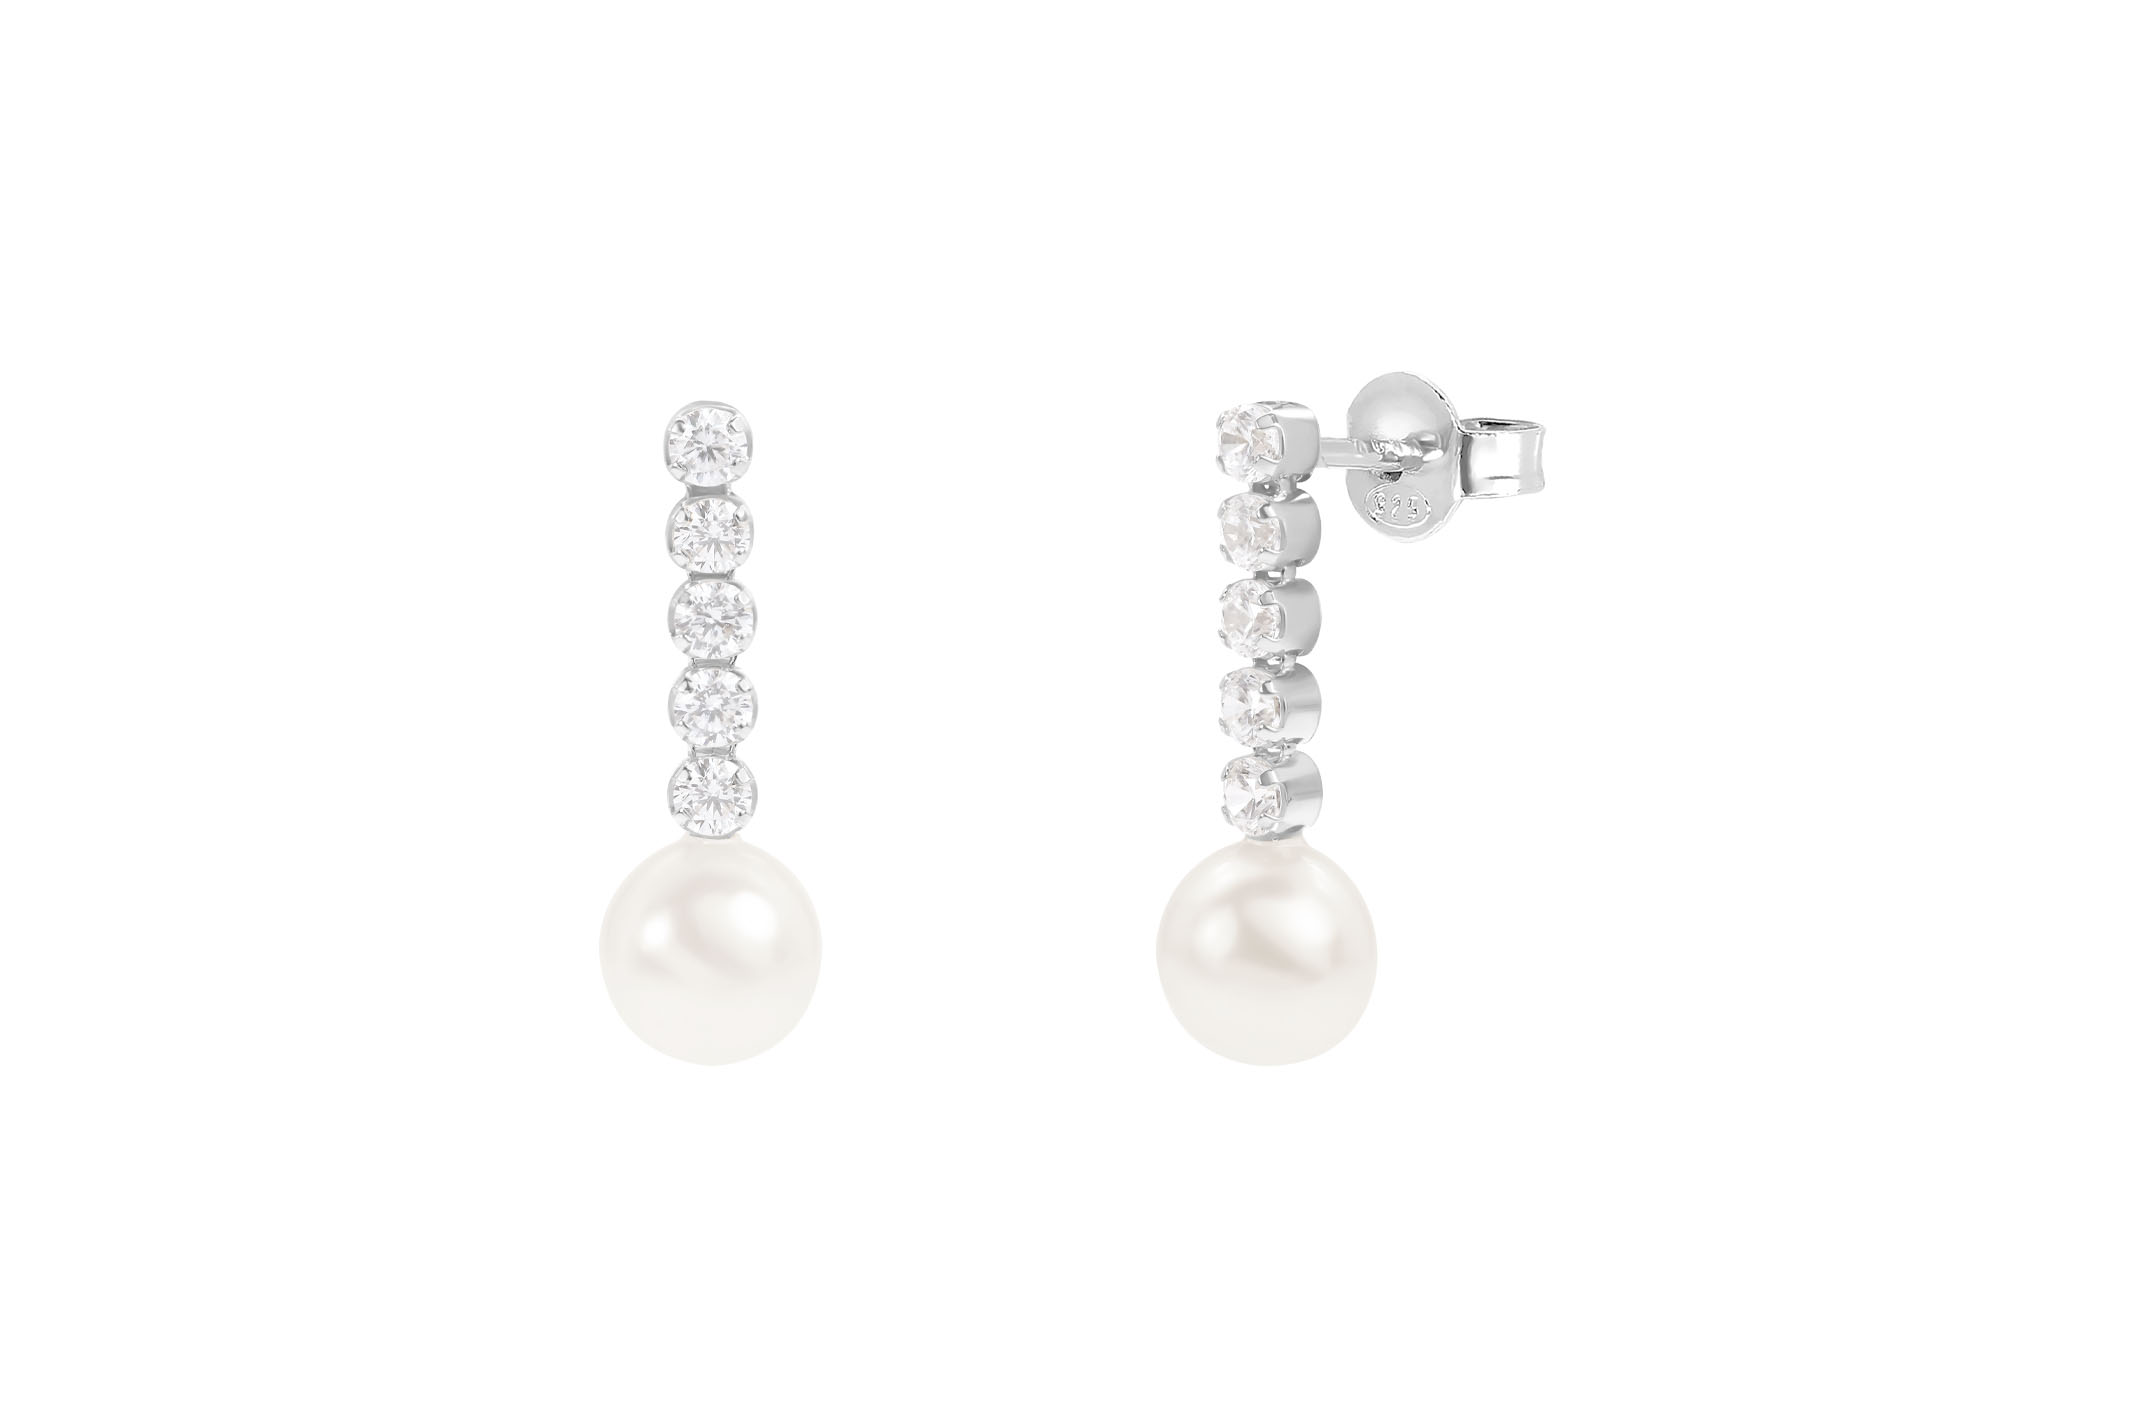 Jewel: earrings;Material: silver 925;Weight: 2.5 gr;Stone: pearl & zirconia;Color: white;Size: 1.8  cm;Gender: woman